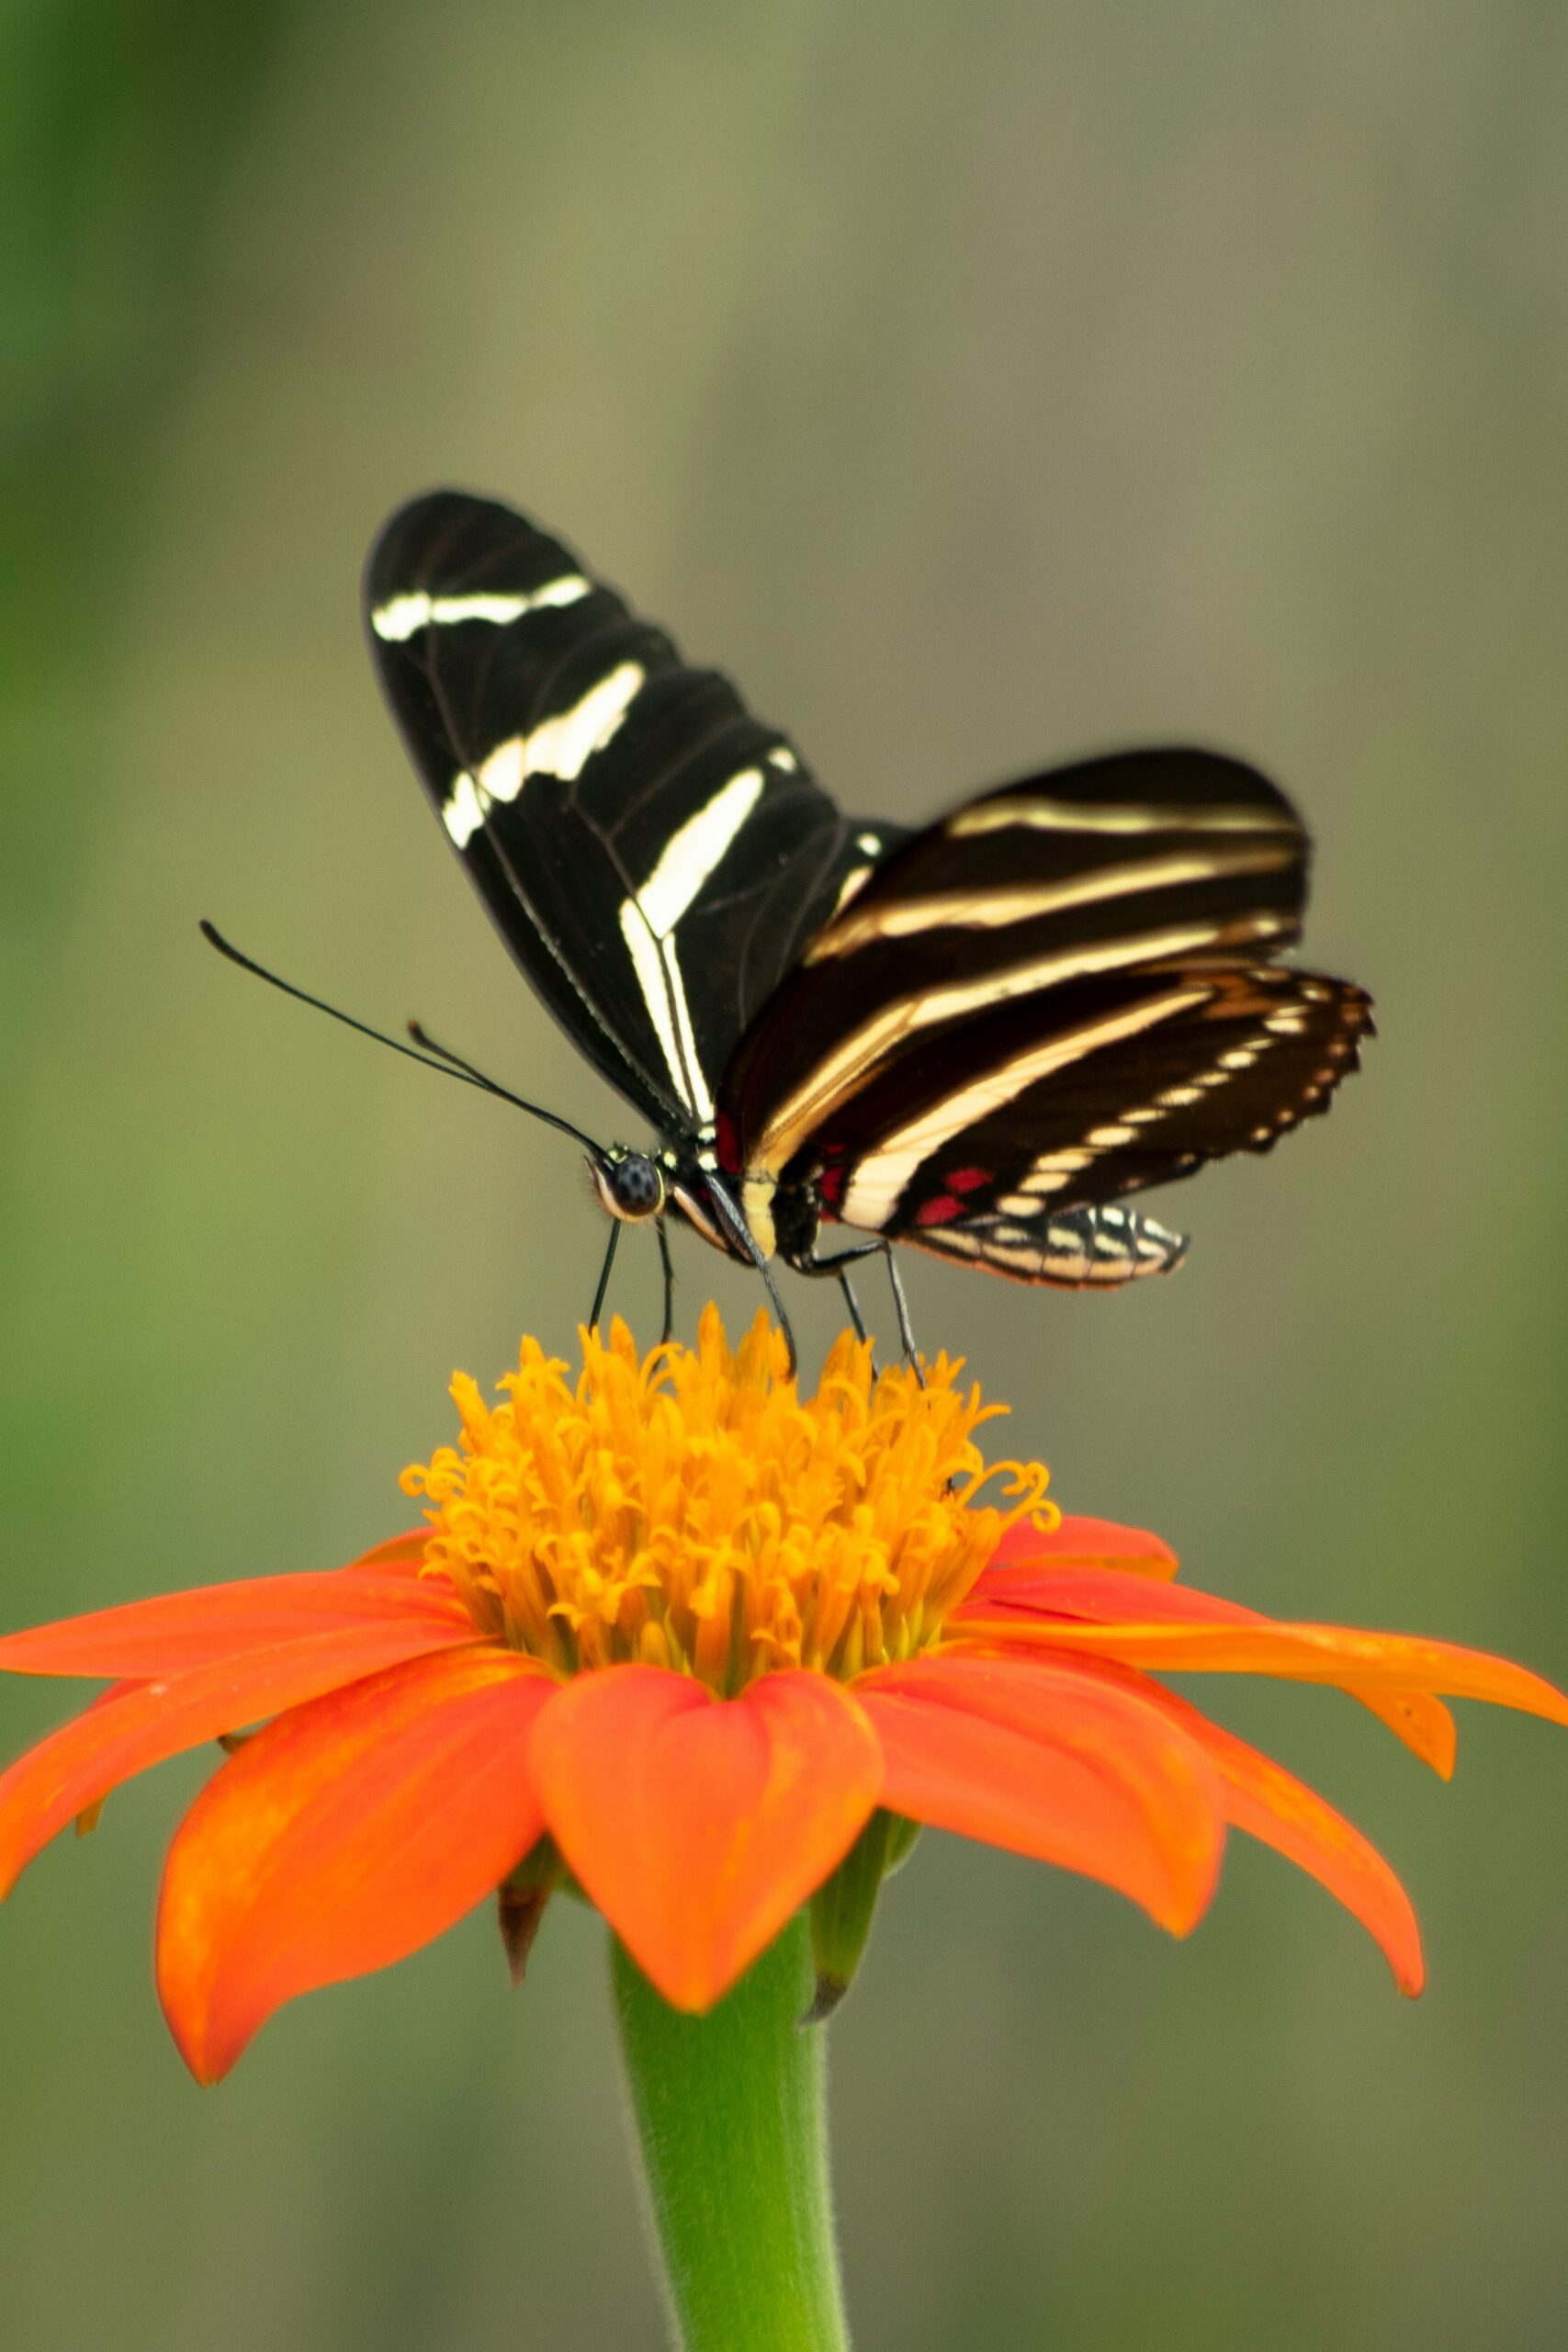 Black and white butterfly on an orange flower